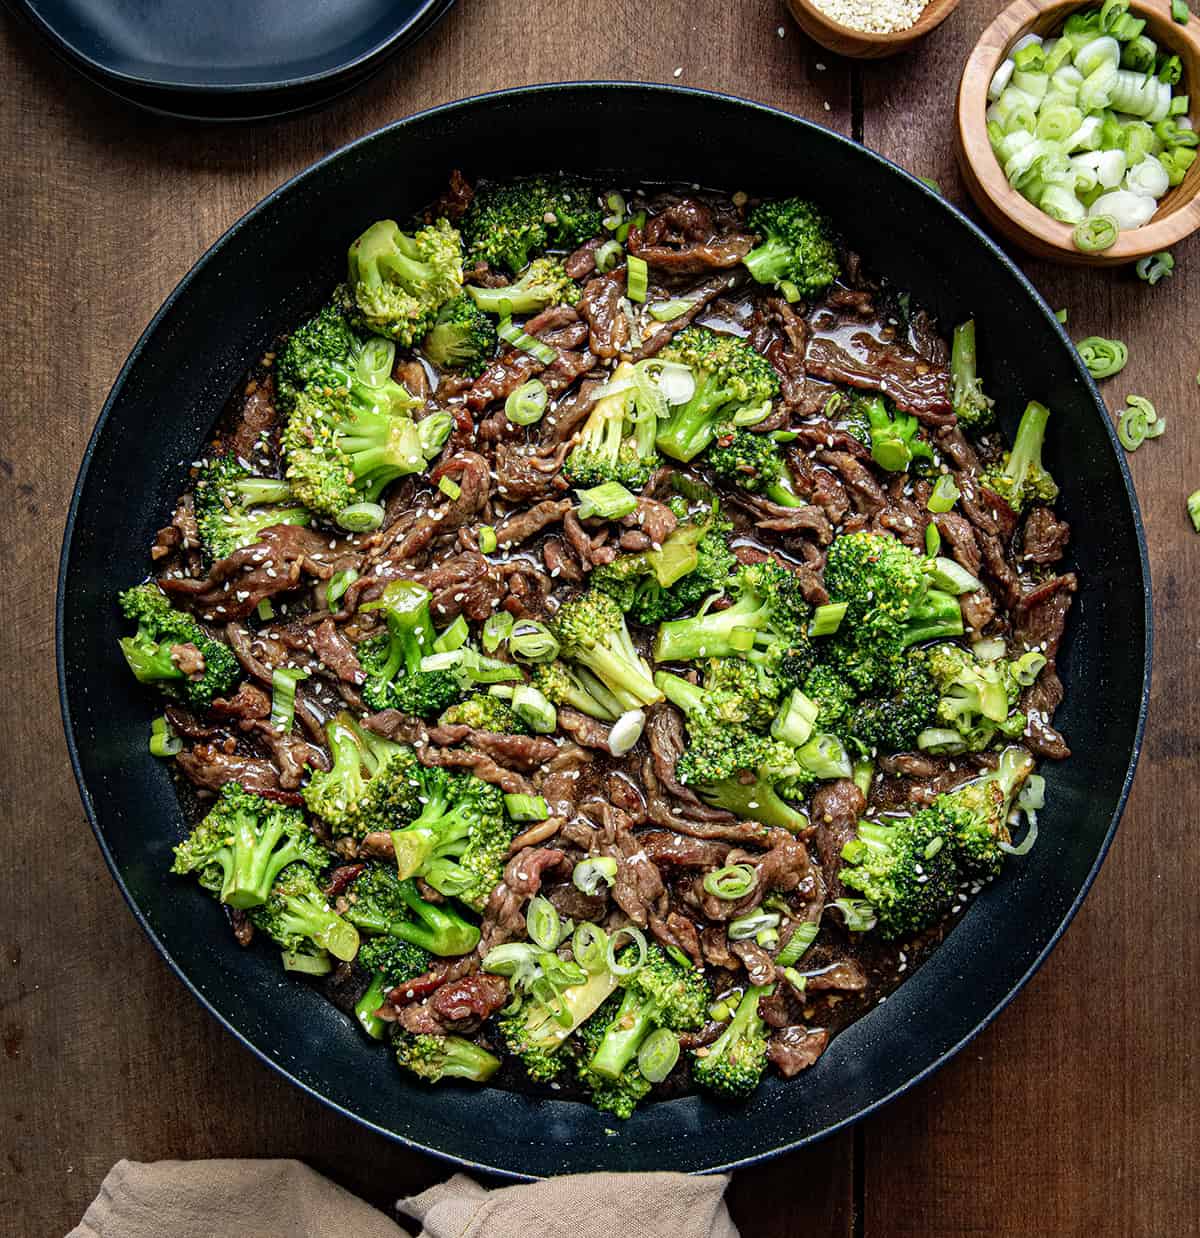 Skillet of Beef and Broccoli on a wooden table from overhead.